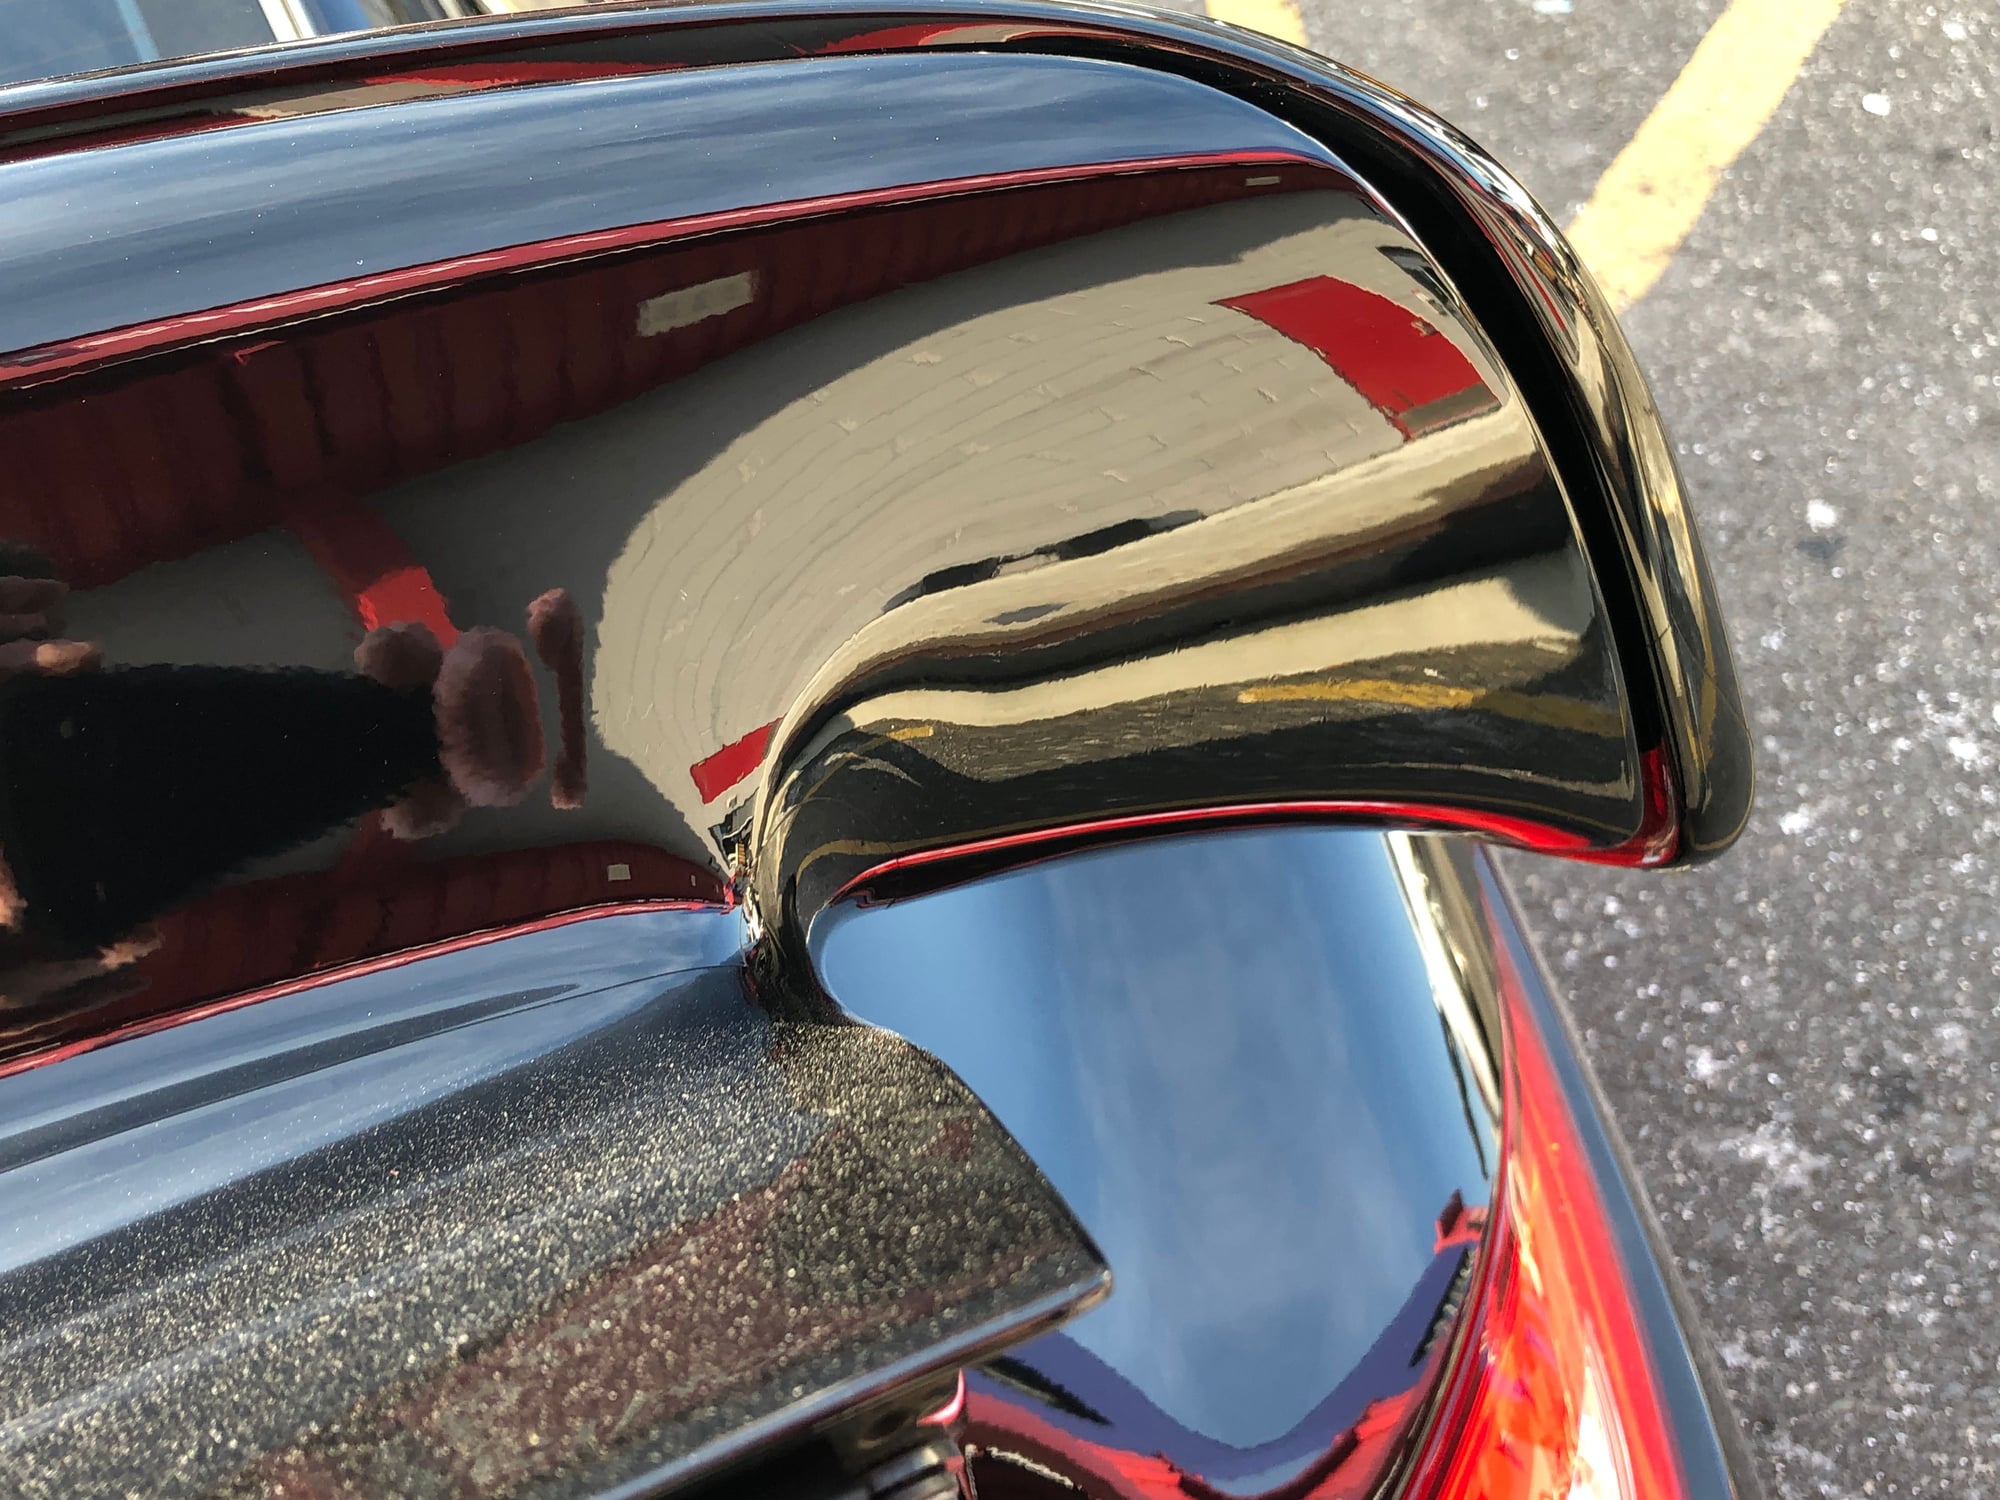 Exterior Body Parts - OEM ORIGINAL PORSCHE 997 911 TURBO S REAR WING SPOILER ENGINE LID COMPLETE IMMACULATE - Used - 2005 to 2012 Porsche Carrera - New York, NY 10012, United States